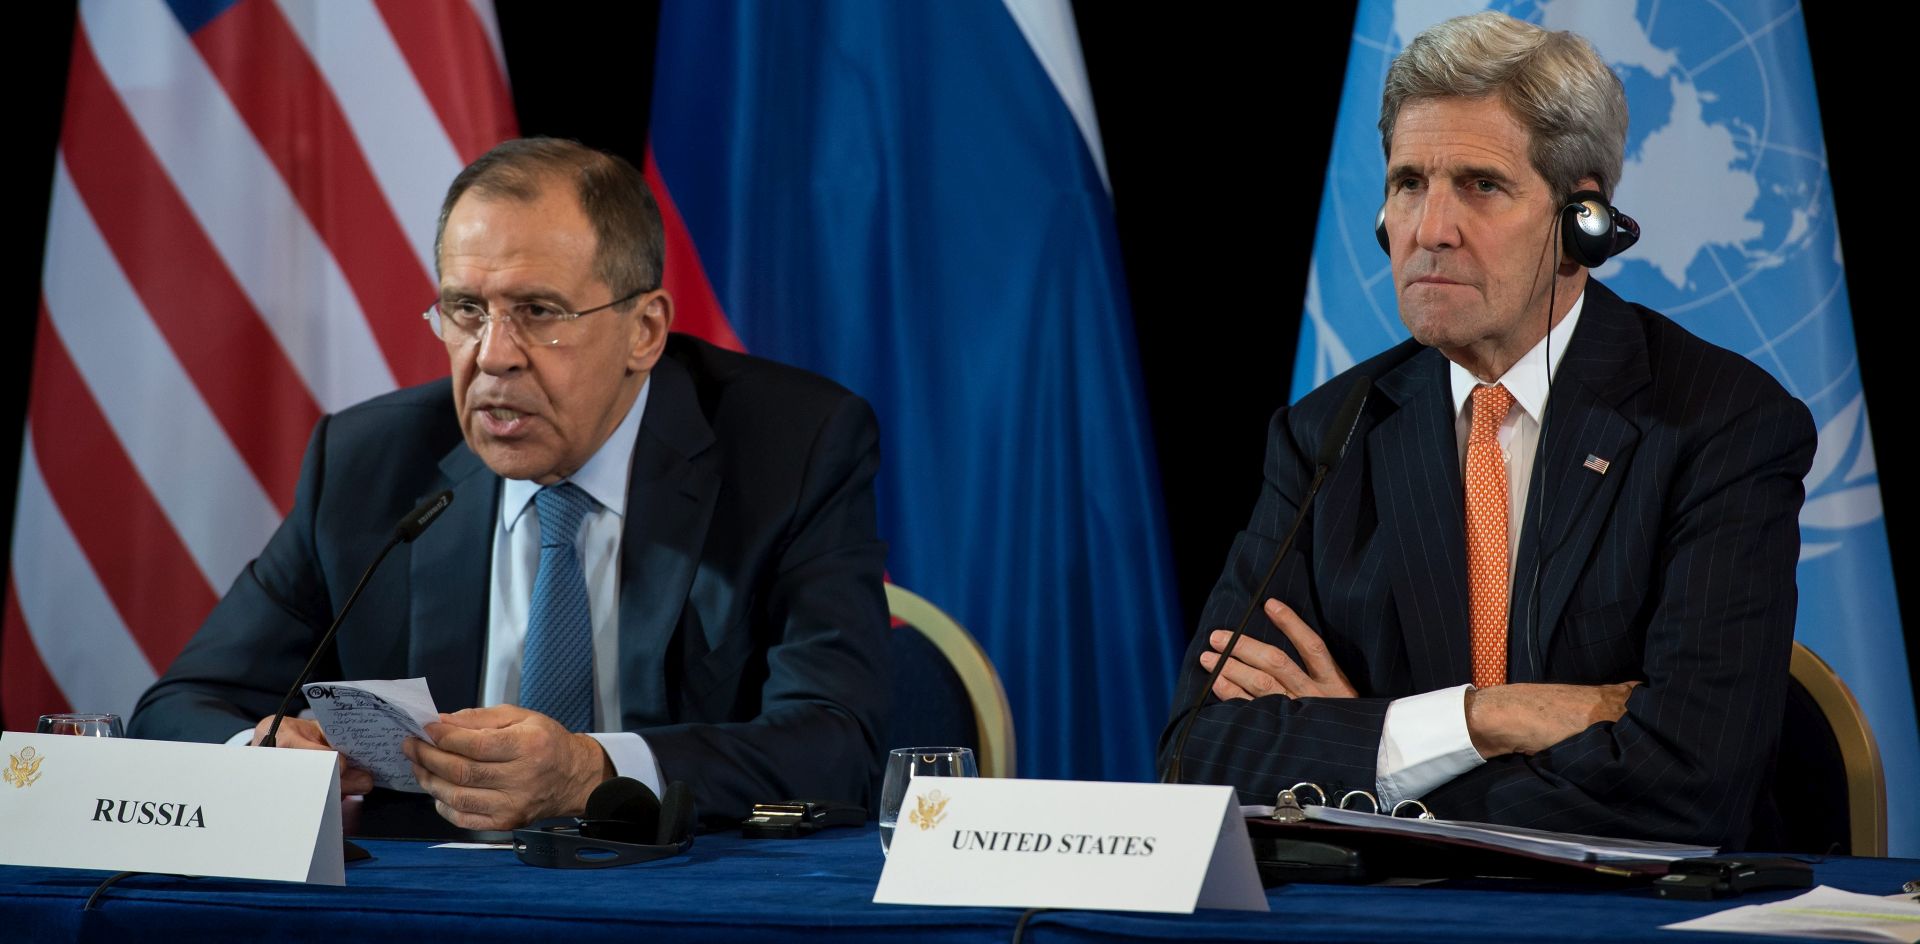 epa05155551  US Secretary of State John Kerry (R) and Russian Foreign Minister Sergei Lavrov (L) hold a press conference after the International Syria Support Group (ISSG) meeting in Munich, Germany, 11 February 2016.
Kerry, Russian Foreign Minister Sergei Lavrov and UN envoy Staffan de Mistura had held nearly six hours of negotiations with European and Middle Eastern foreign ministers before announcing an agreement of a nationwide 'cessation of hostilities' in Syria, hours before the Munich Security Conference. The agreement will not apply to the Islamic State militant group, US Secretary of State John Kerry said.  EPA/SVEN HOPPE